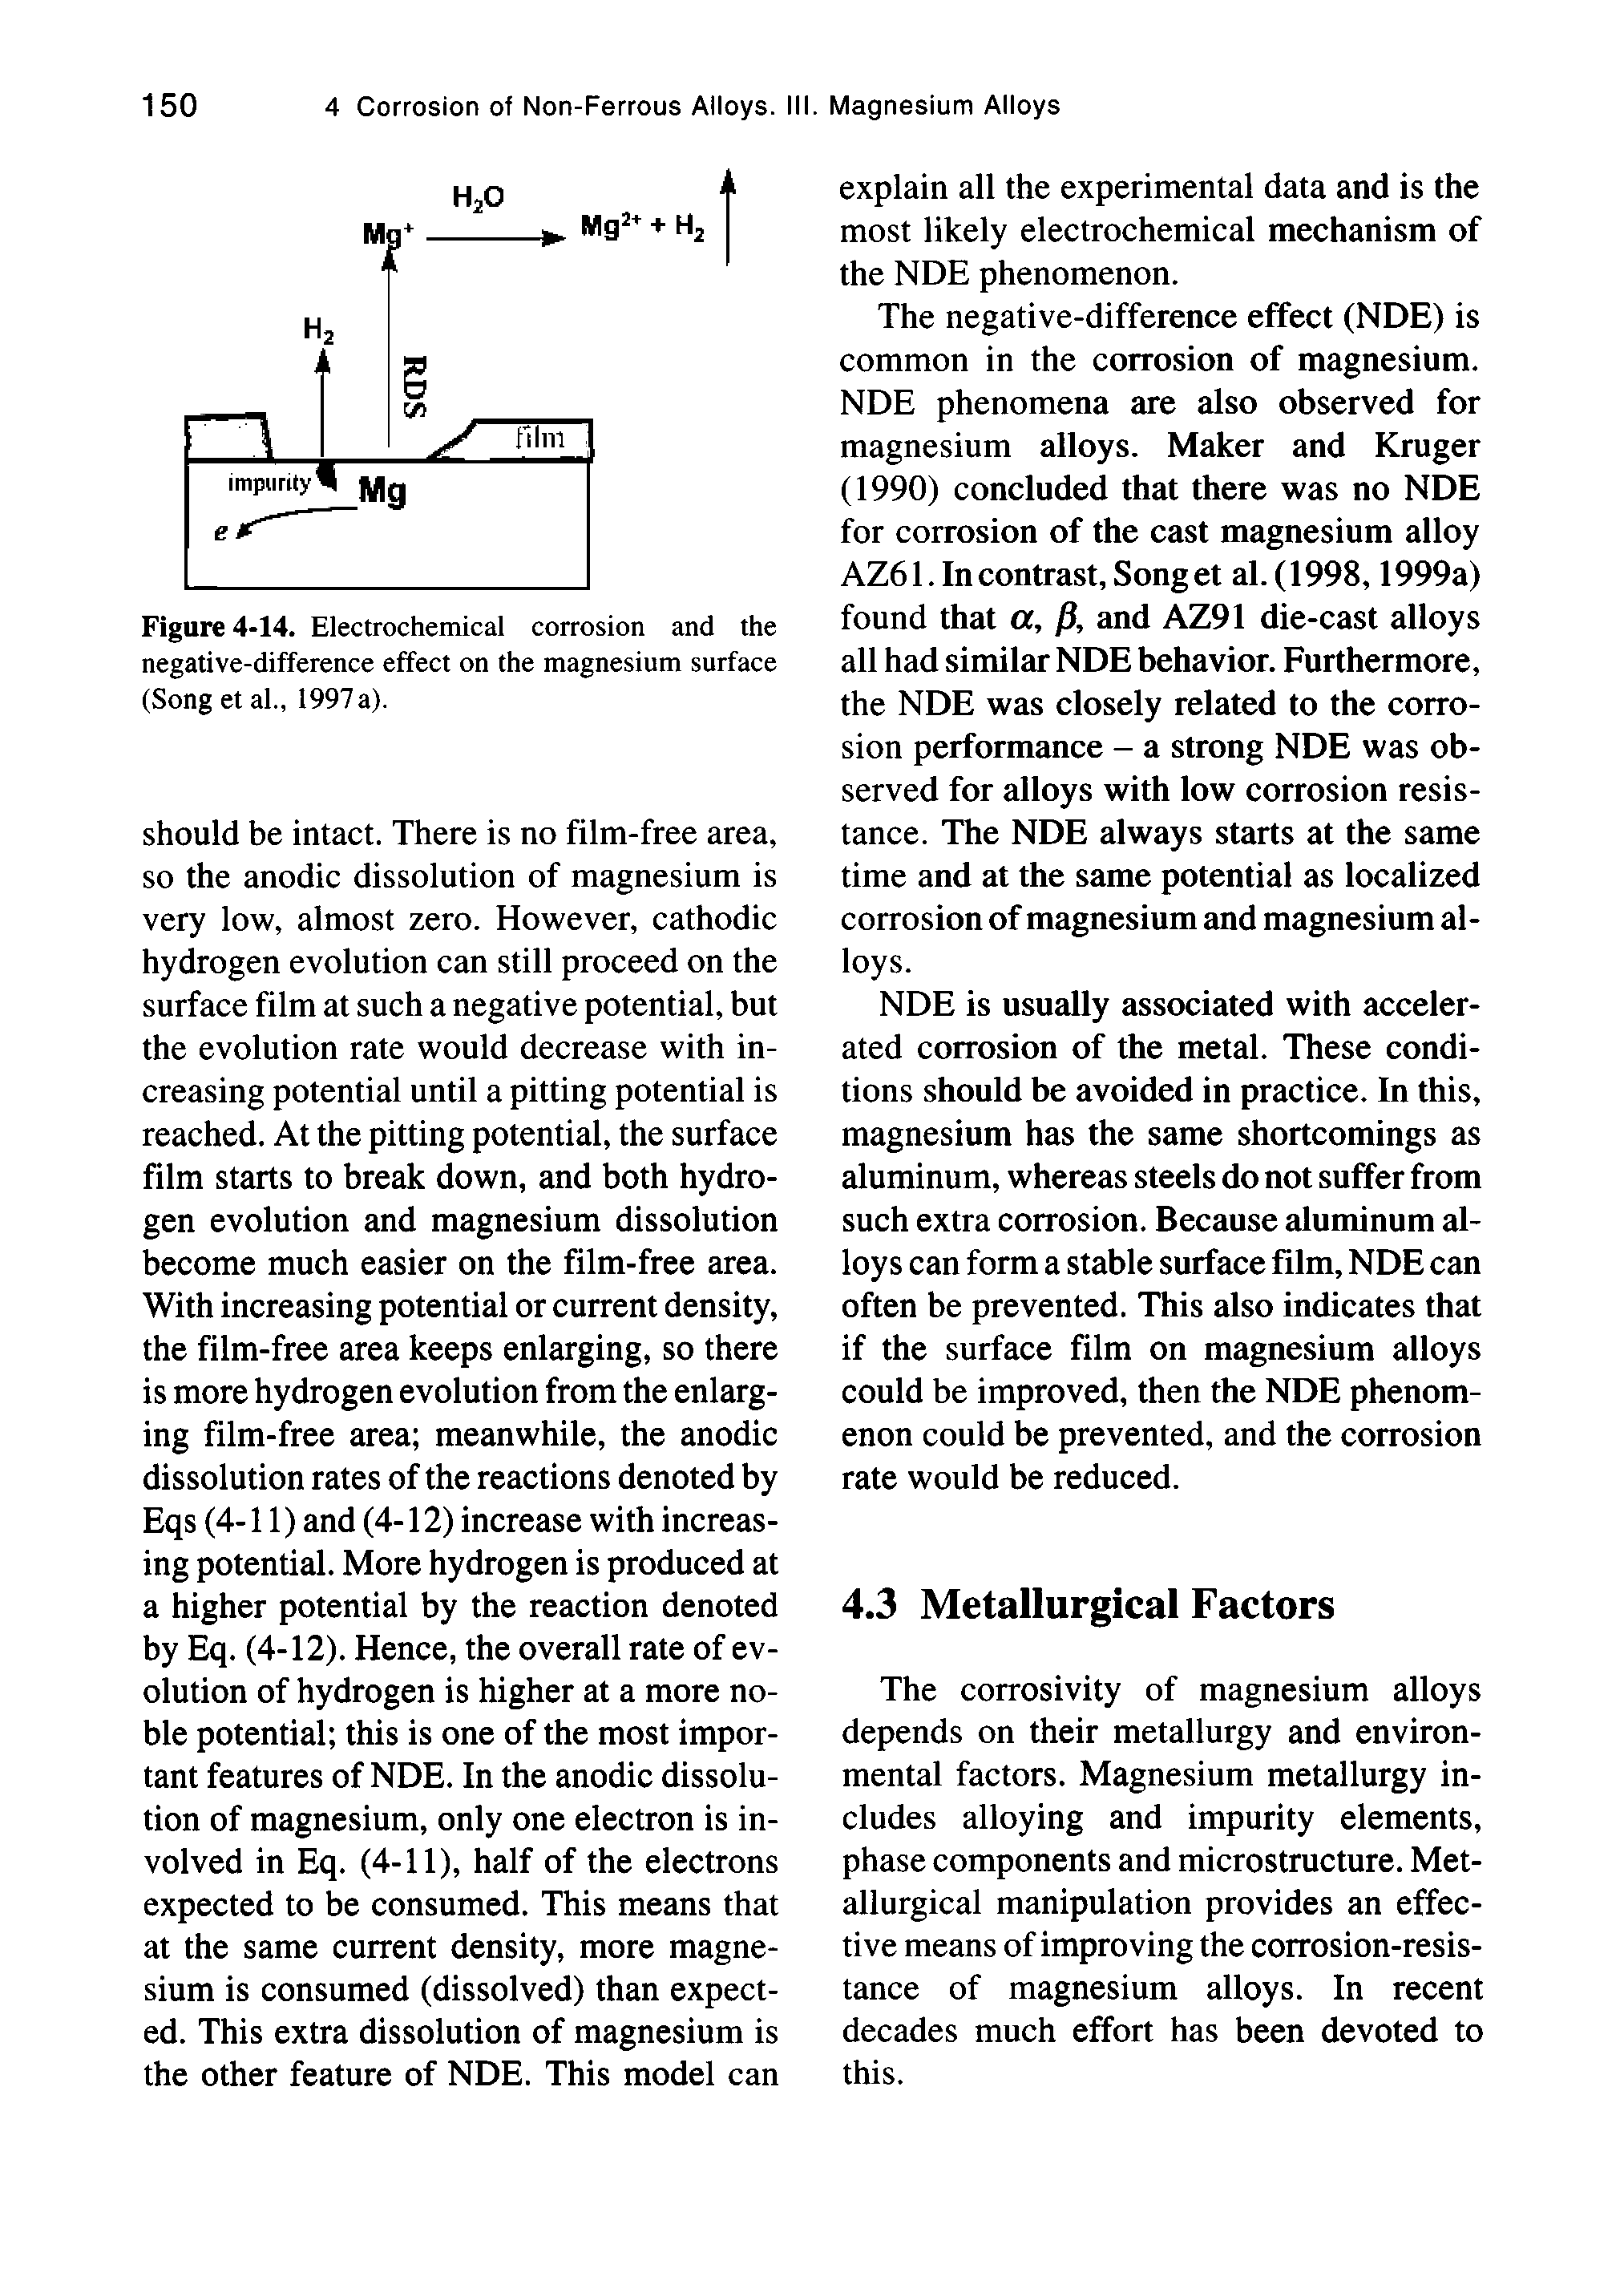 Figure 4-14. Electrochemical corrosion and the negative-difference effect on the magnesium surface (Song et al 1997 a).